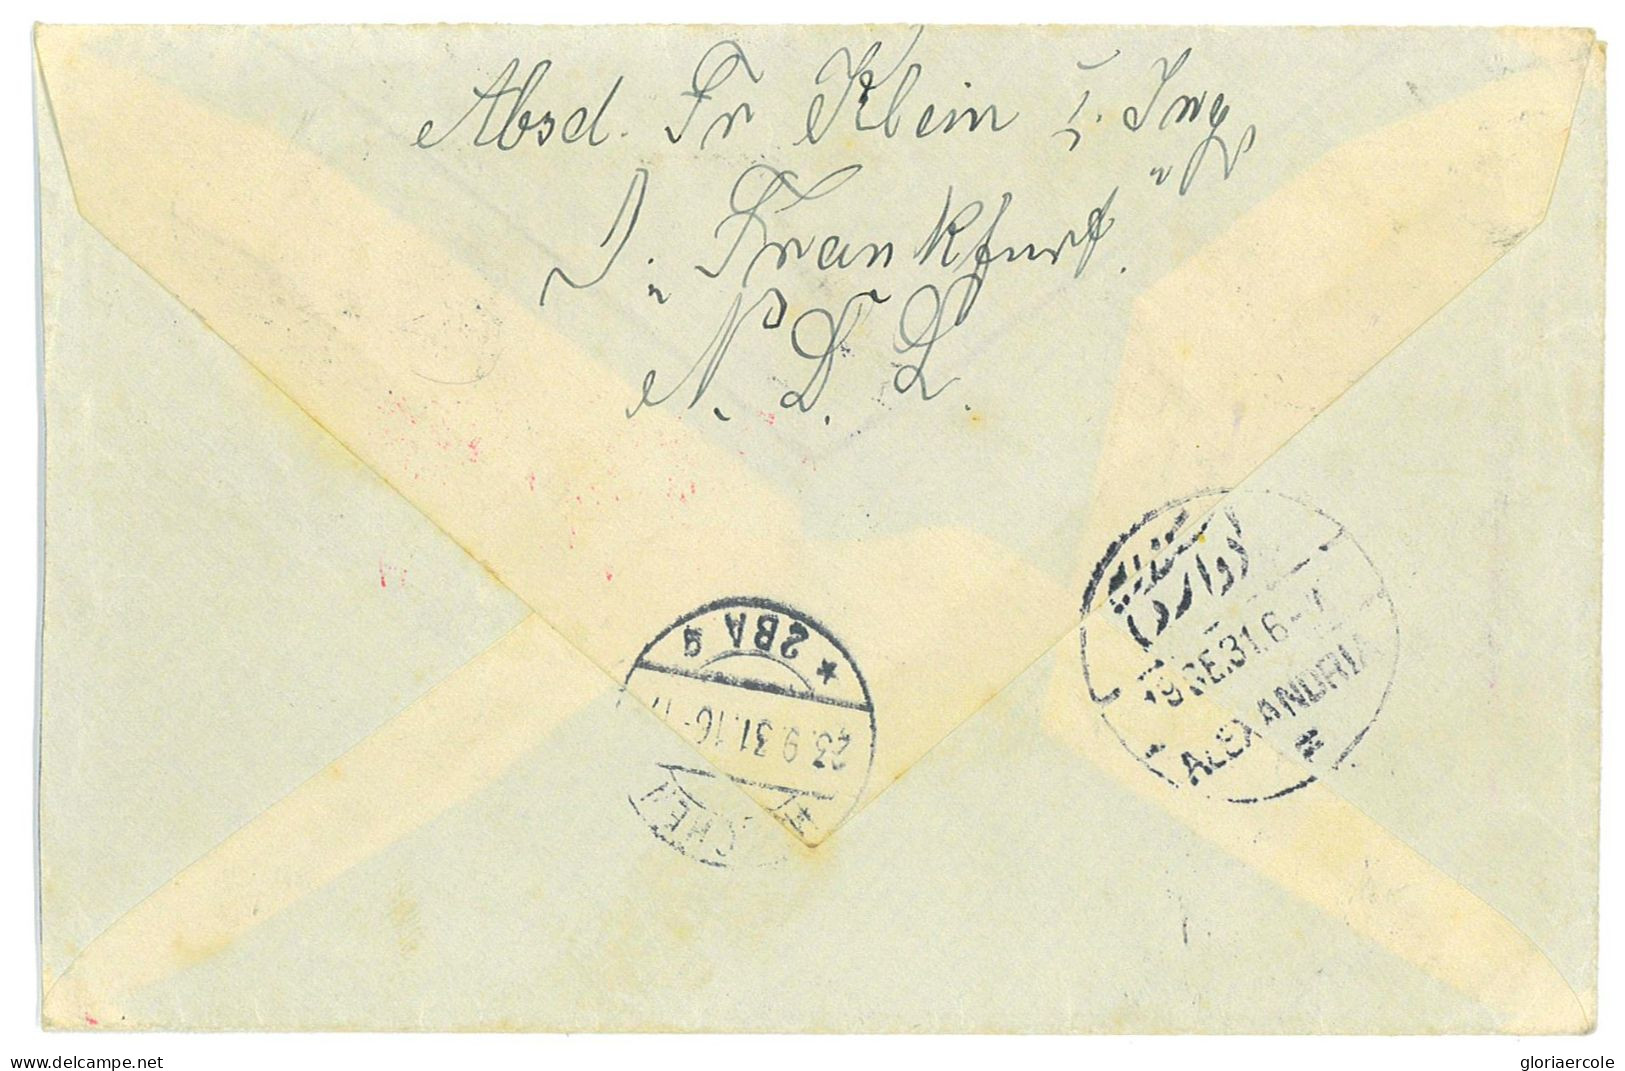 P2839 - EGYPT TO GERMANY 1931 USING A AIR MAIL EGYPT STAMP, FROM PORT SAID TO MÜNCHEN - Storia Postale